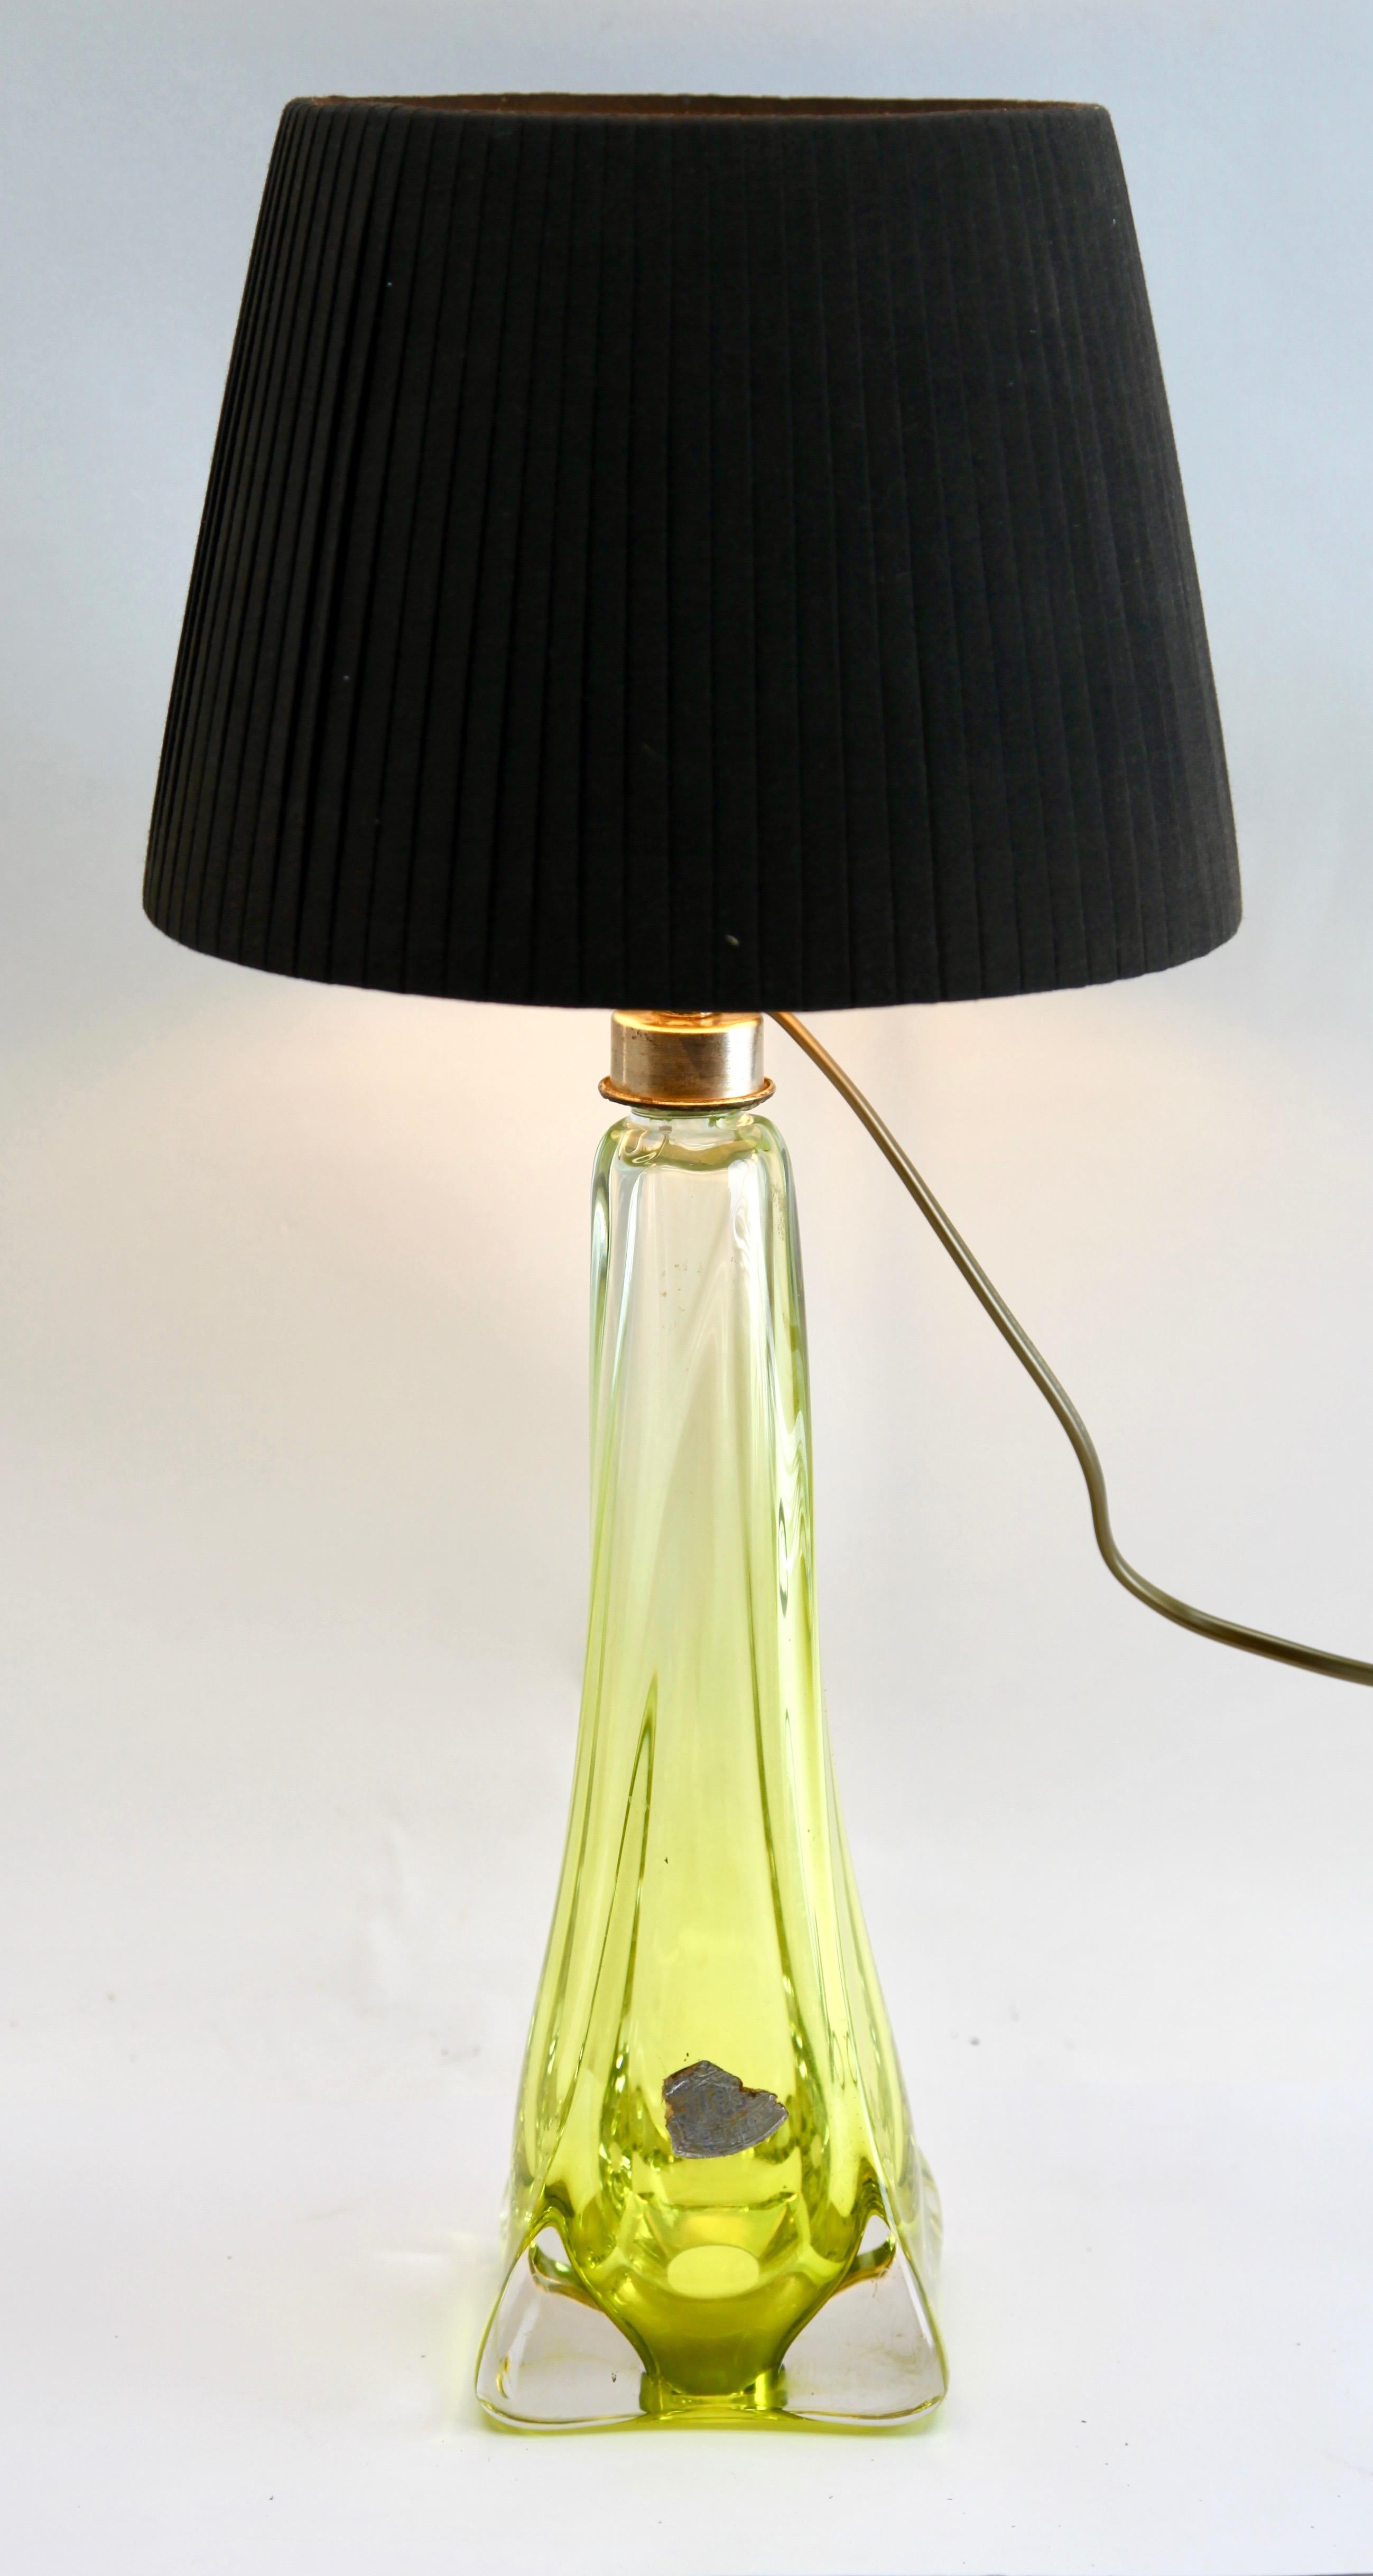 This simple yet graceful table lamp is in large size; 15 inches excluding the lamp-fitting and shade.
The colored core in Classic Val Saint Lambert tint, has been given a thick Sommerso (clear crystal casing) so that the object appears delicate